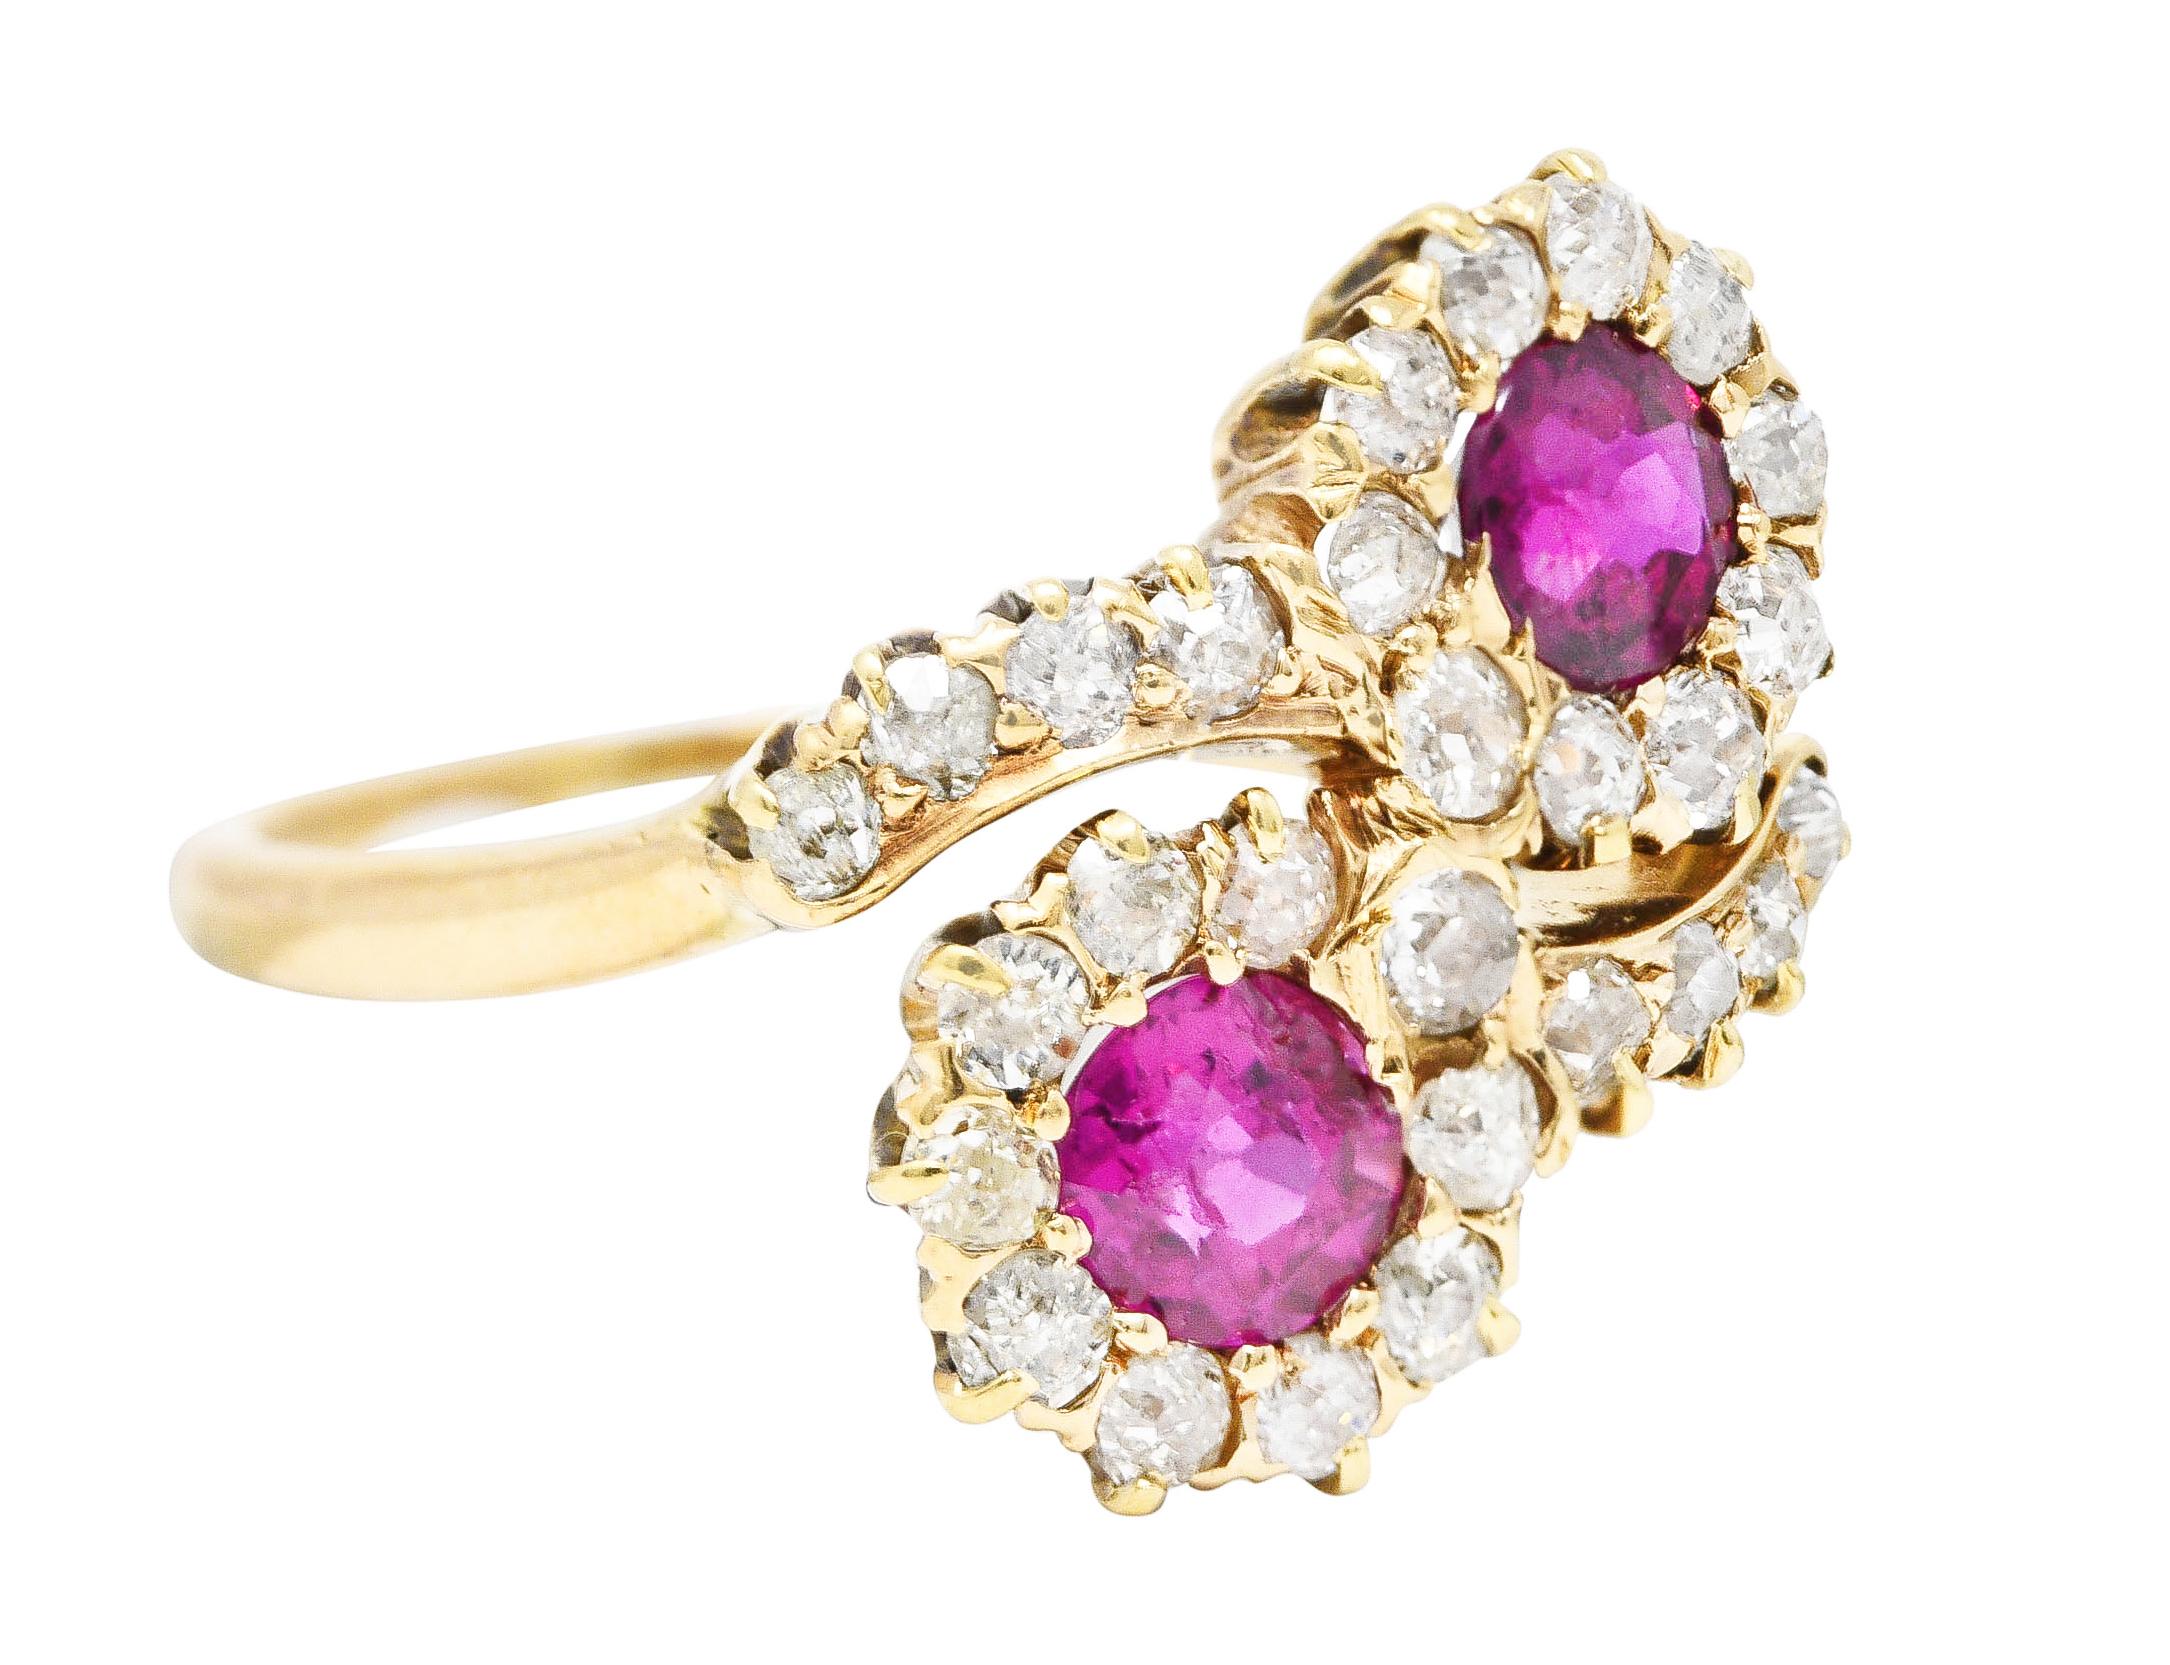 Designed as a bypass ring terminating with round cut rubies weighing approximately 1.10 carats total. Transparent purplish red in color - accented by old European cut diamond surround. Weighing approximately 0.66 carat total - H/I color with SI